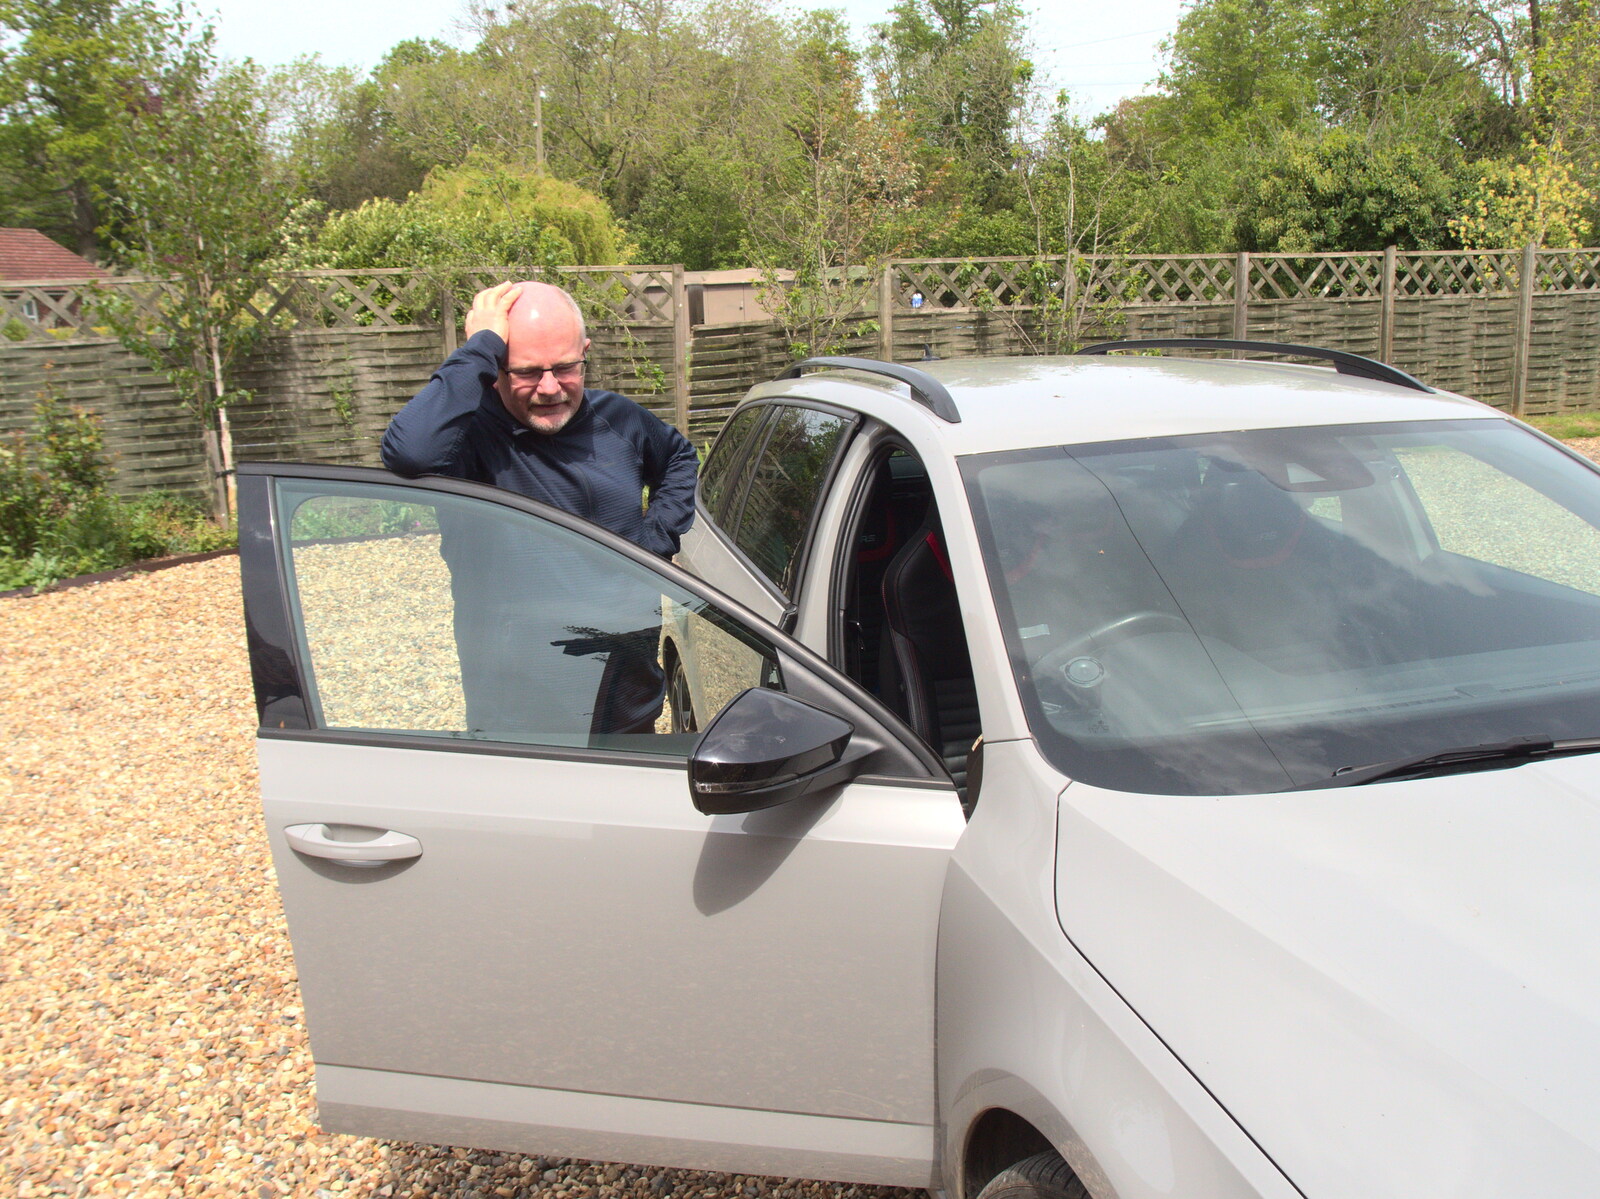 Hamish leans on his car from Garden Centres, and Hamish Visits, Brome, Suffolk - 28th May 2021